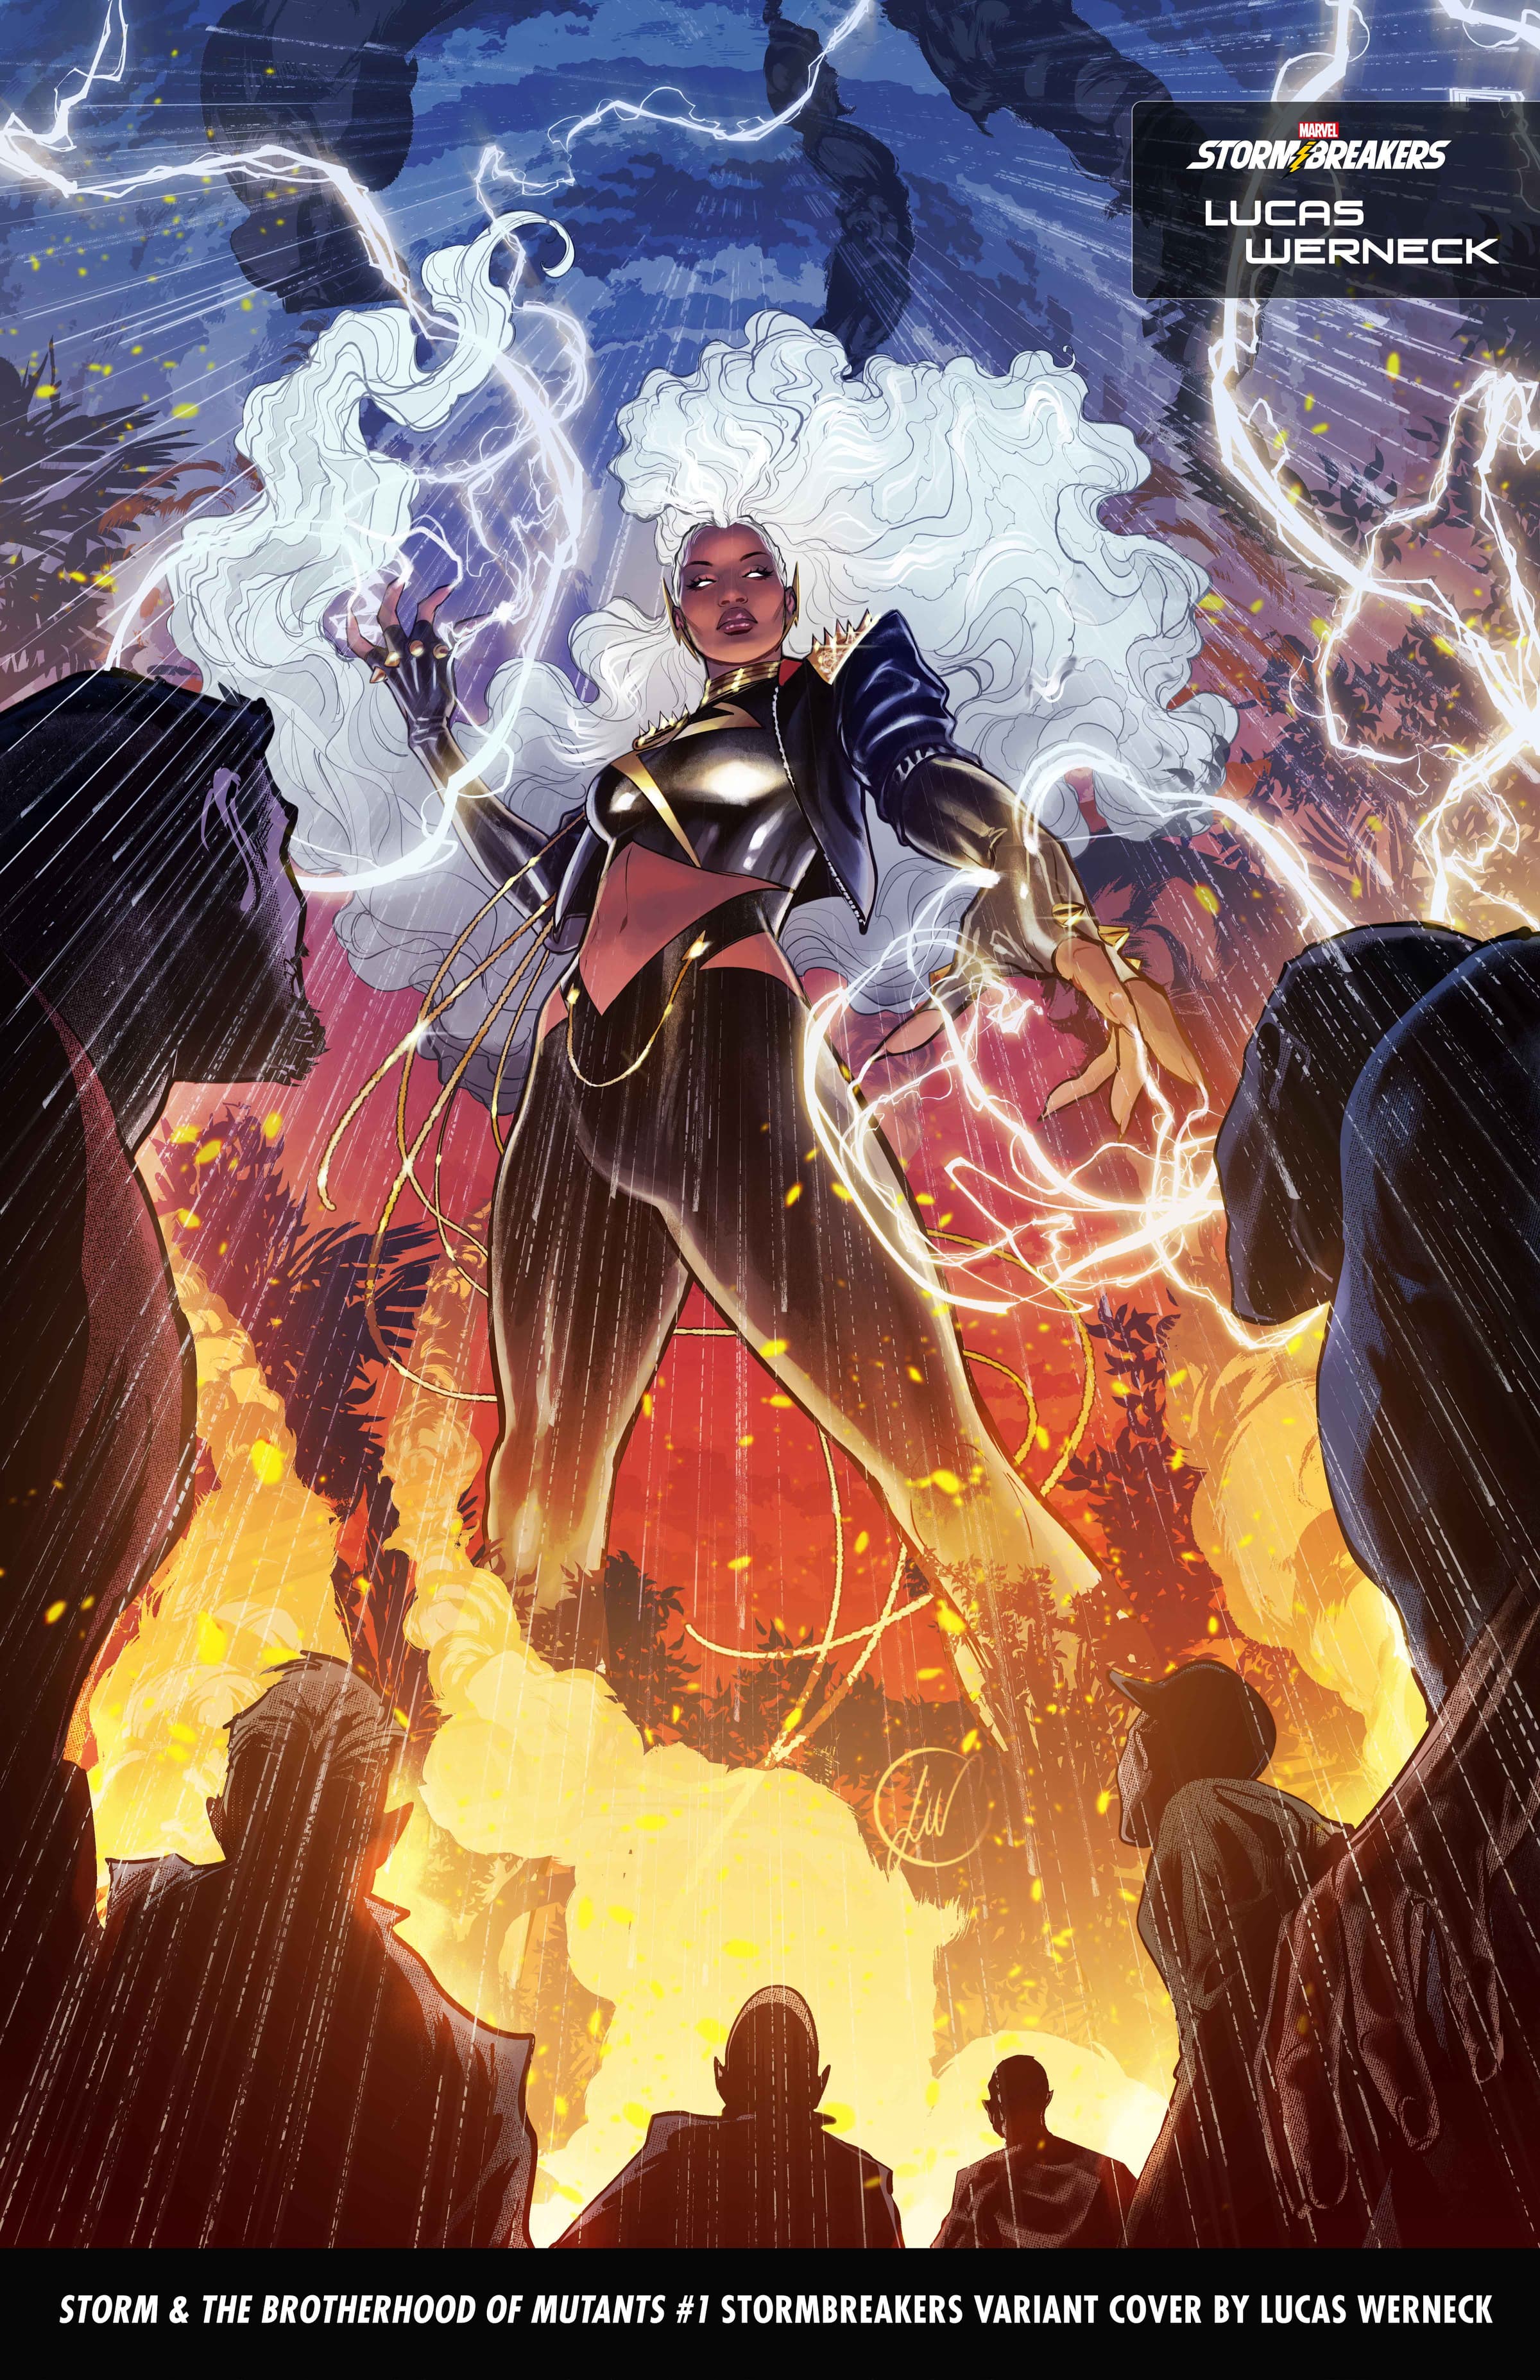 STORM & THE BROTHERHOOD OF MUTANTS #1 STORMBREAKERS VARIANT COVER BY LUCAS WERNECK